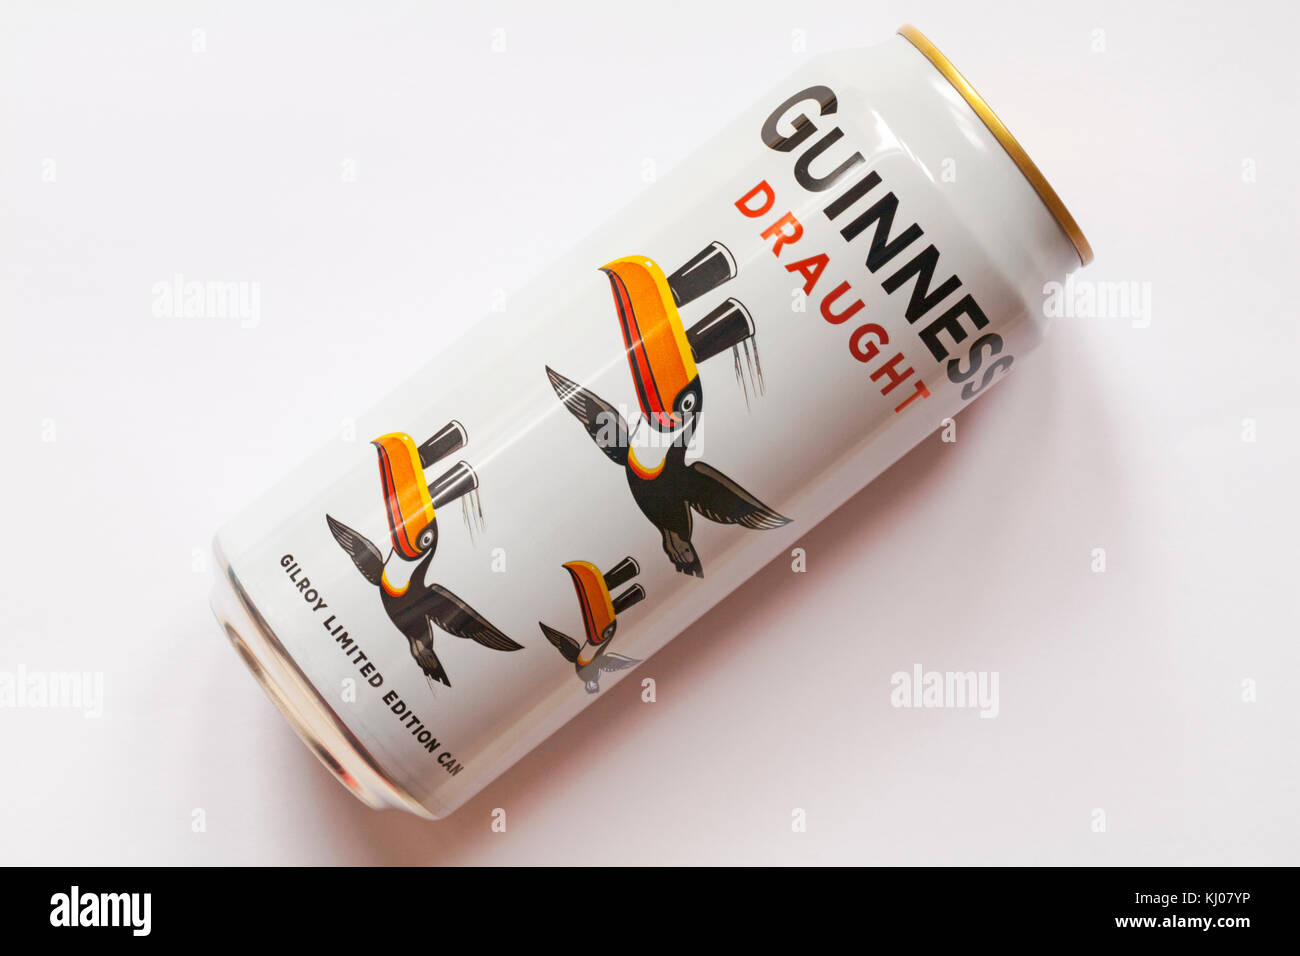 https://c8.alamy.com/comp/KJ07YP/guinness-draught-limited-edition-guinness-cans-featuring-john-gilroys-KJ07YP.jpg